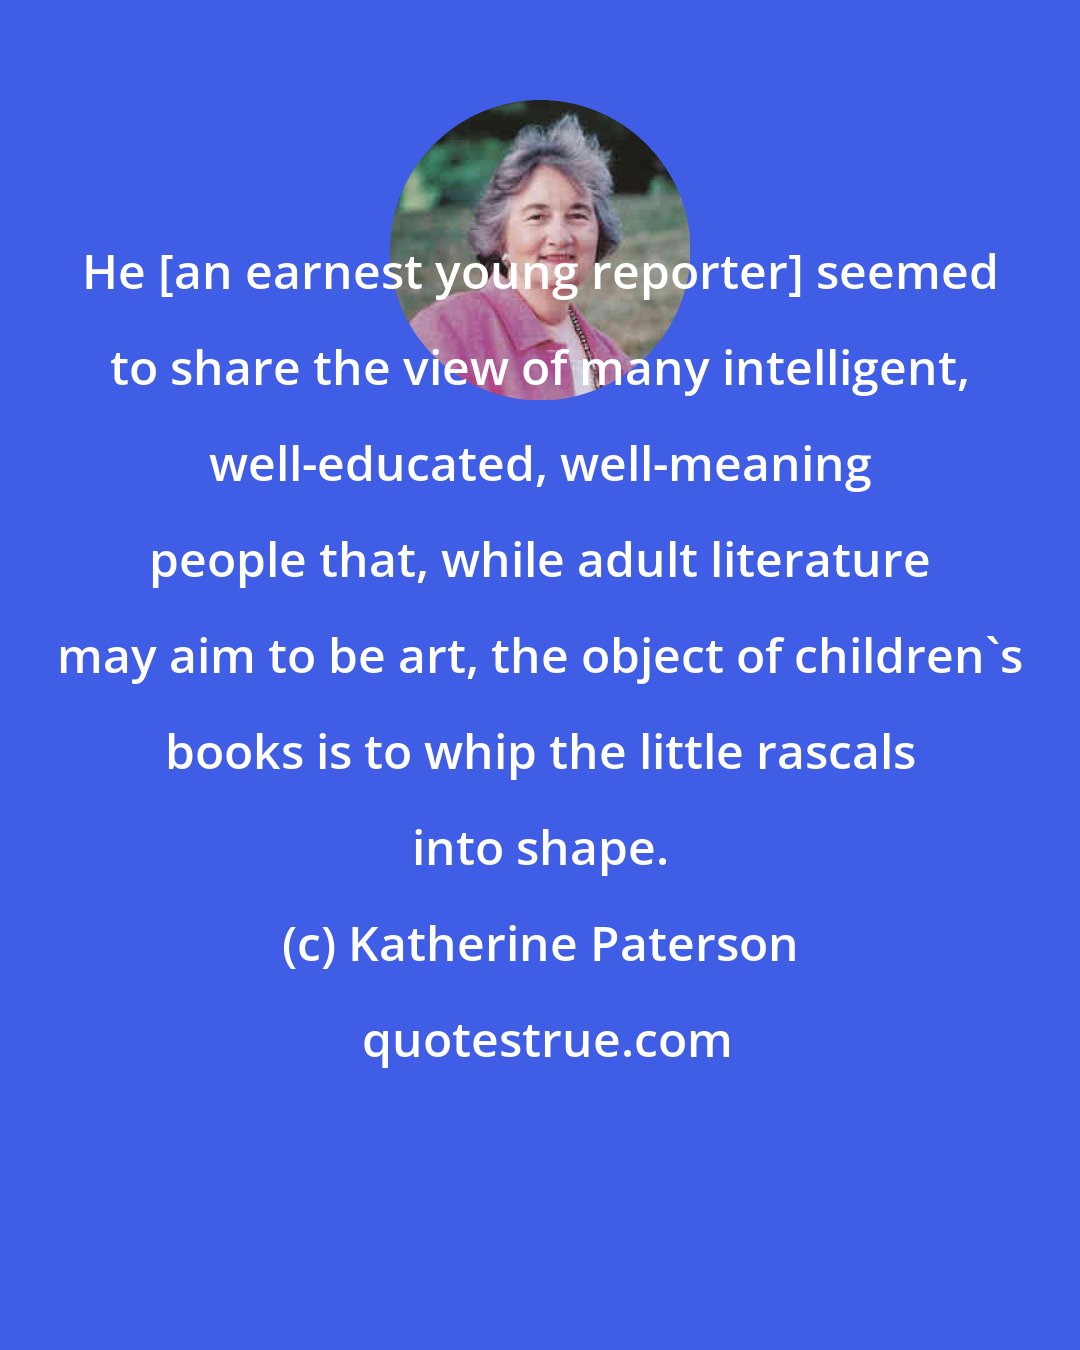 Katherine Paterson: He [an earnest young reporter] seemed to share the view of many intelligent, well-educated, well-meaning people that, while adult literature may aim to be art, the object of children's books is to whip the little rascals into shape.